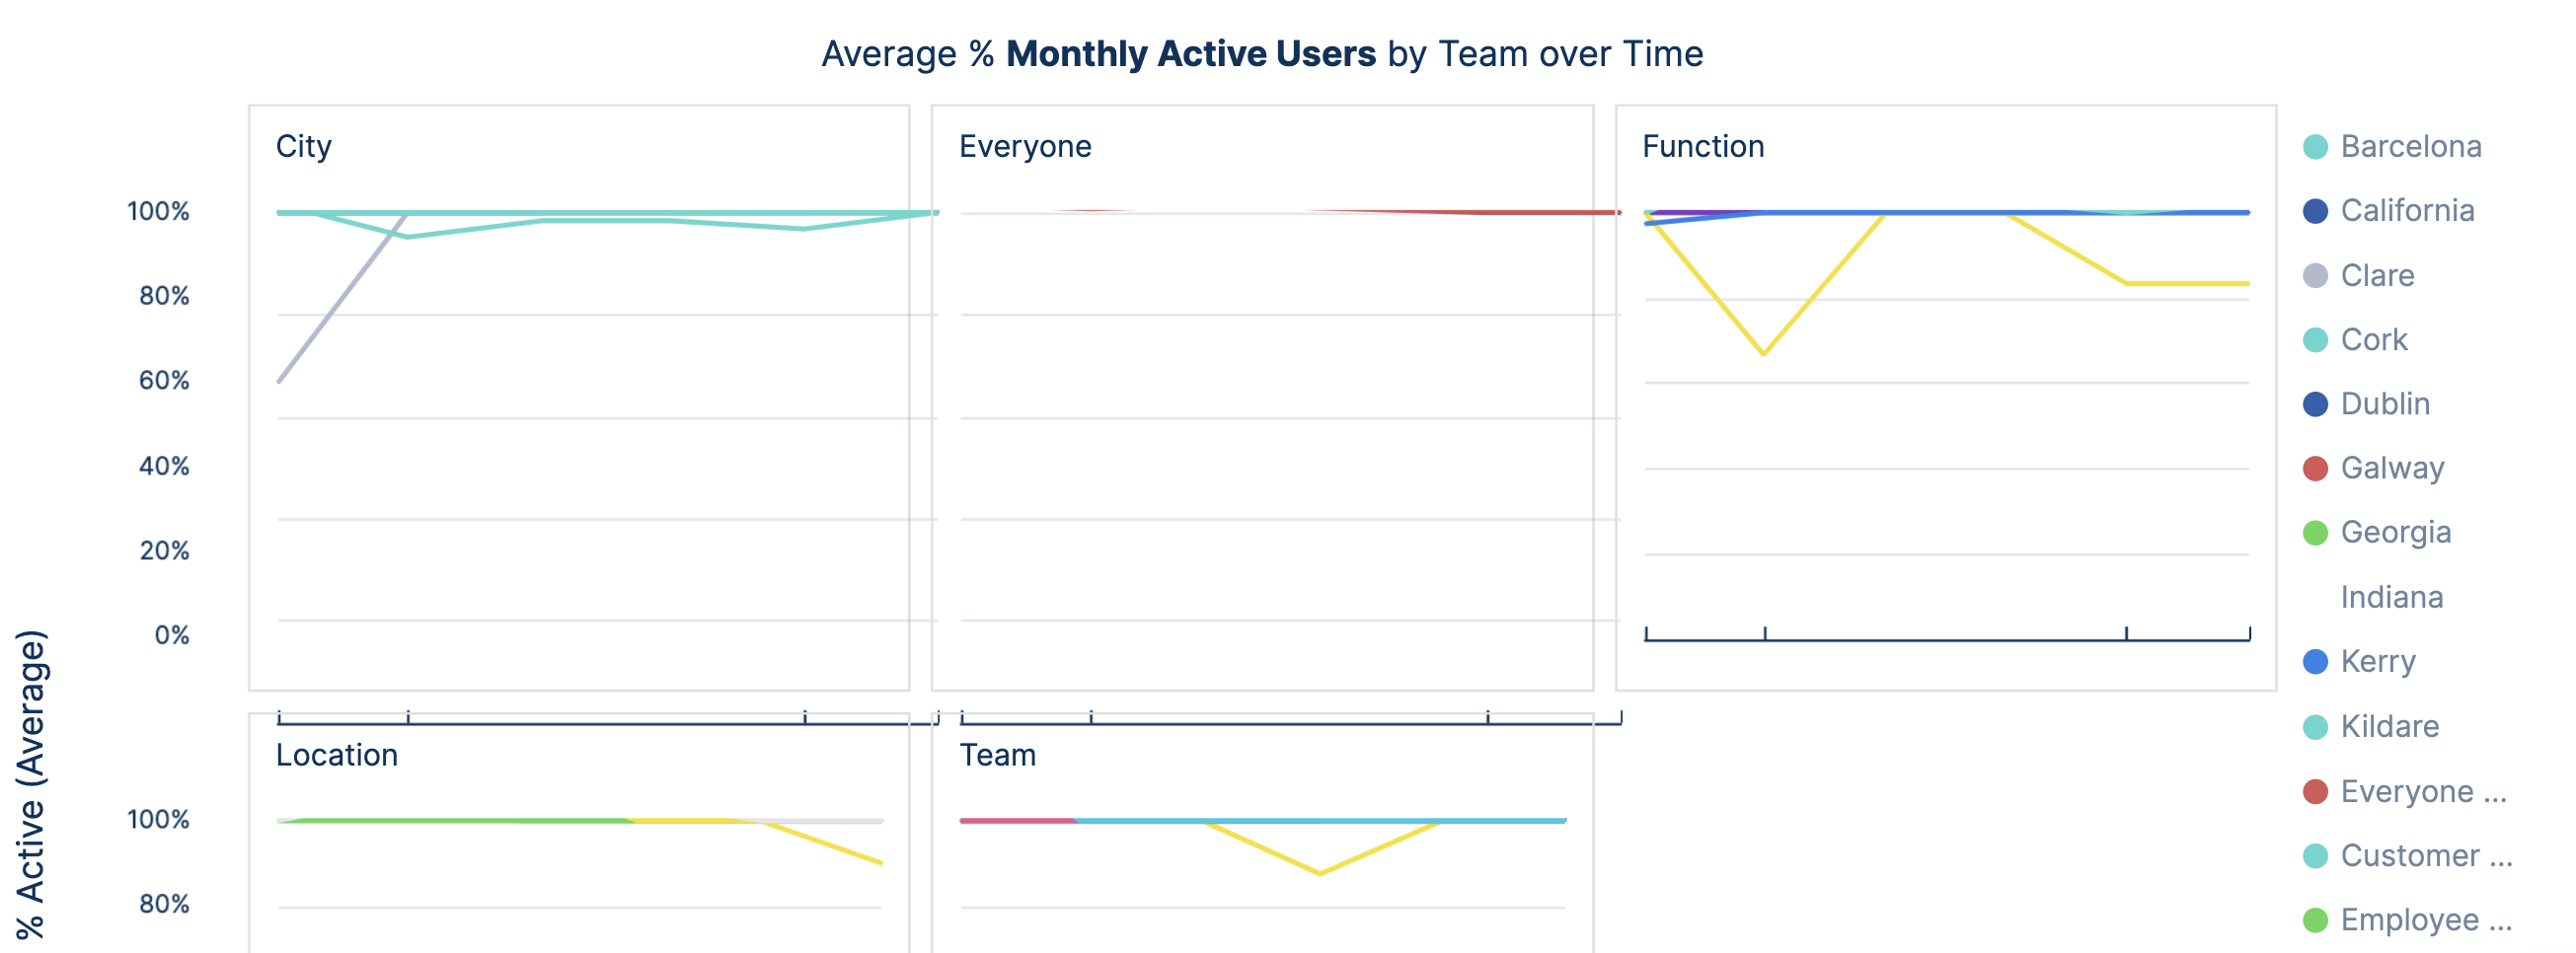 UA-Average_Percentage_of_Monthly__Weekly__Daily_active_users_by_team_over_time.png